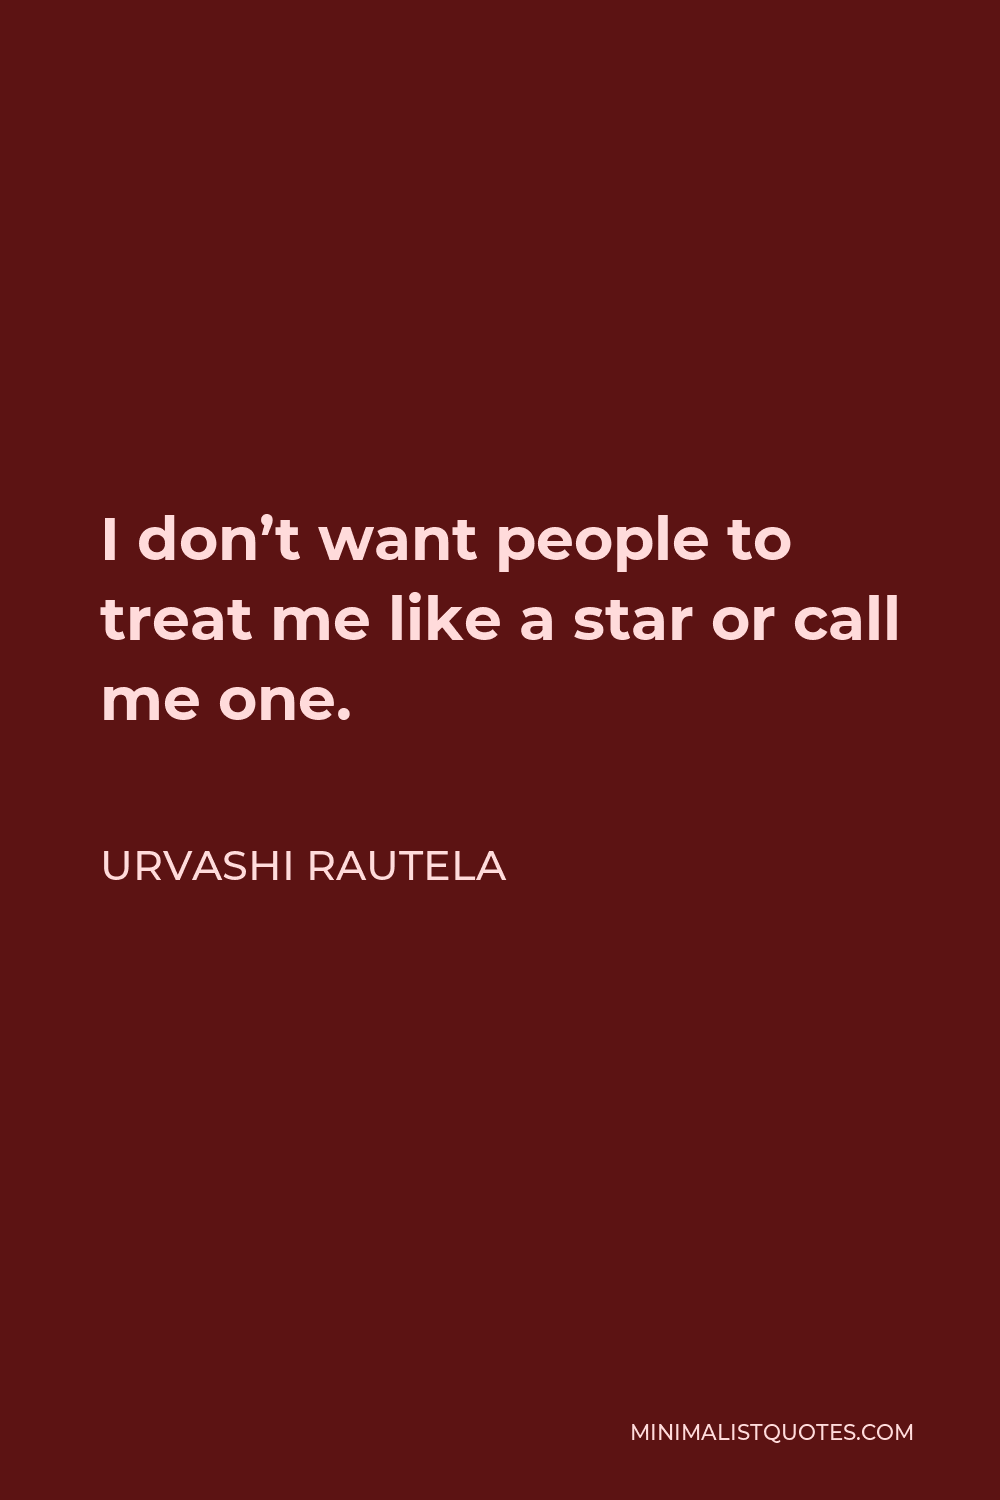 Urvashi Rautela Quote - I don’t want people to treat me like a star or call me one.